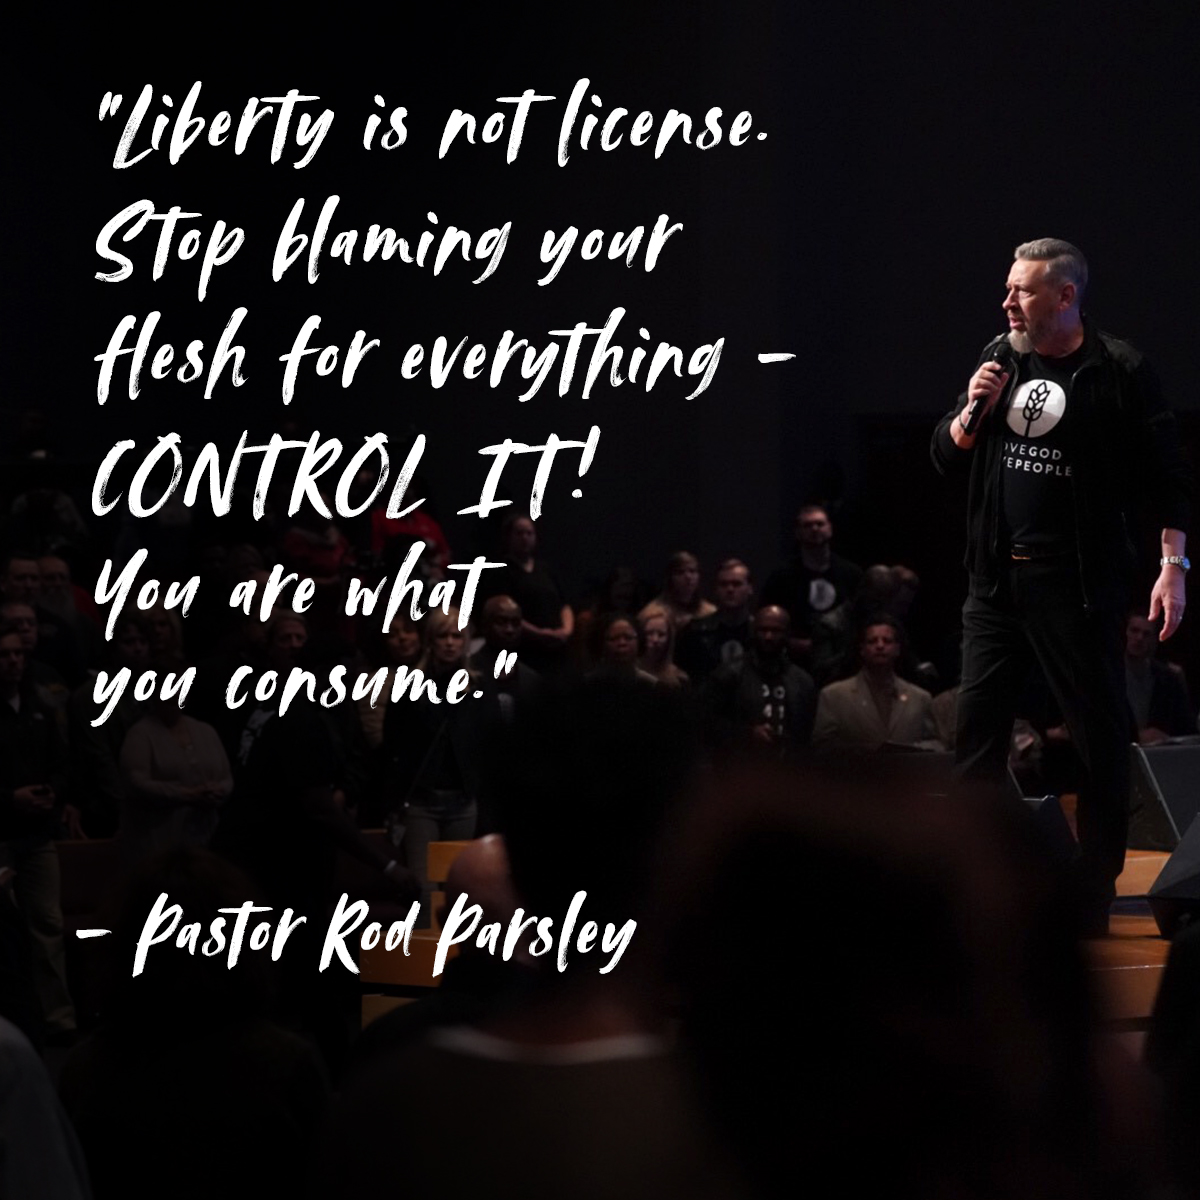 “Liberty is not license. Stop blaming your flesh for everything – control it! You are what you consume.” – Pastor Rod Parsley